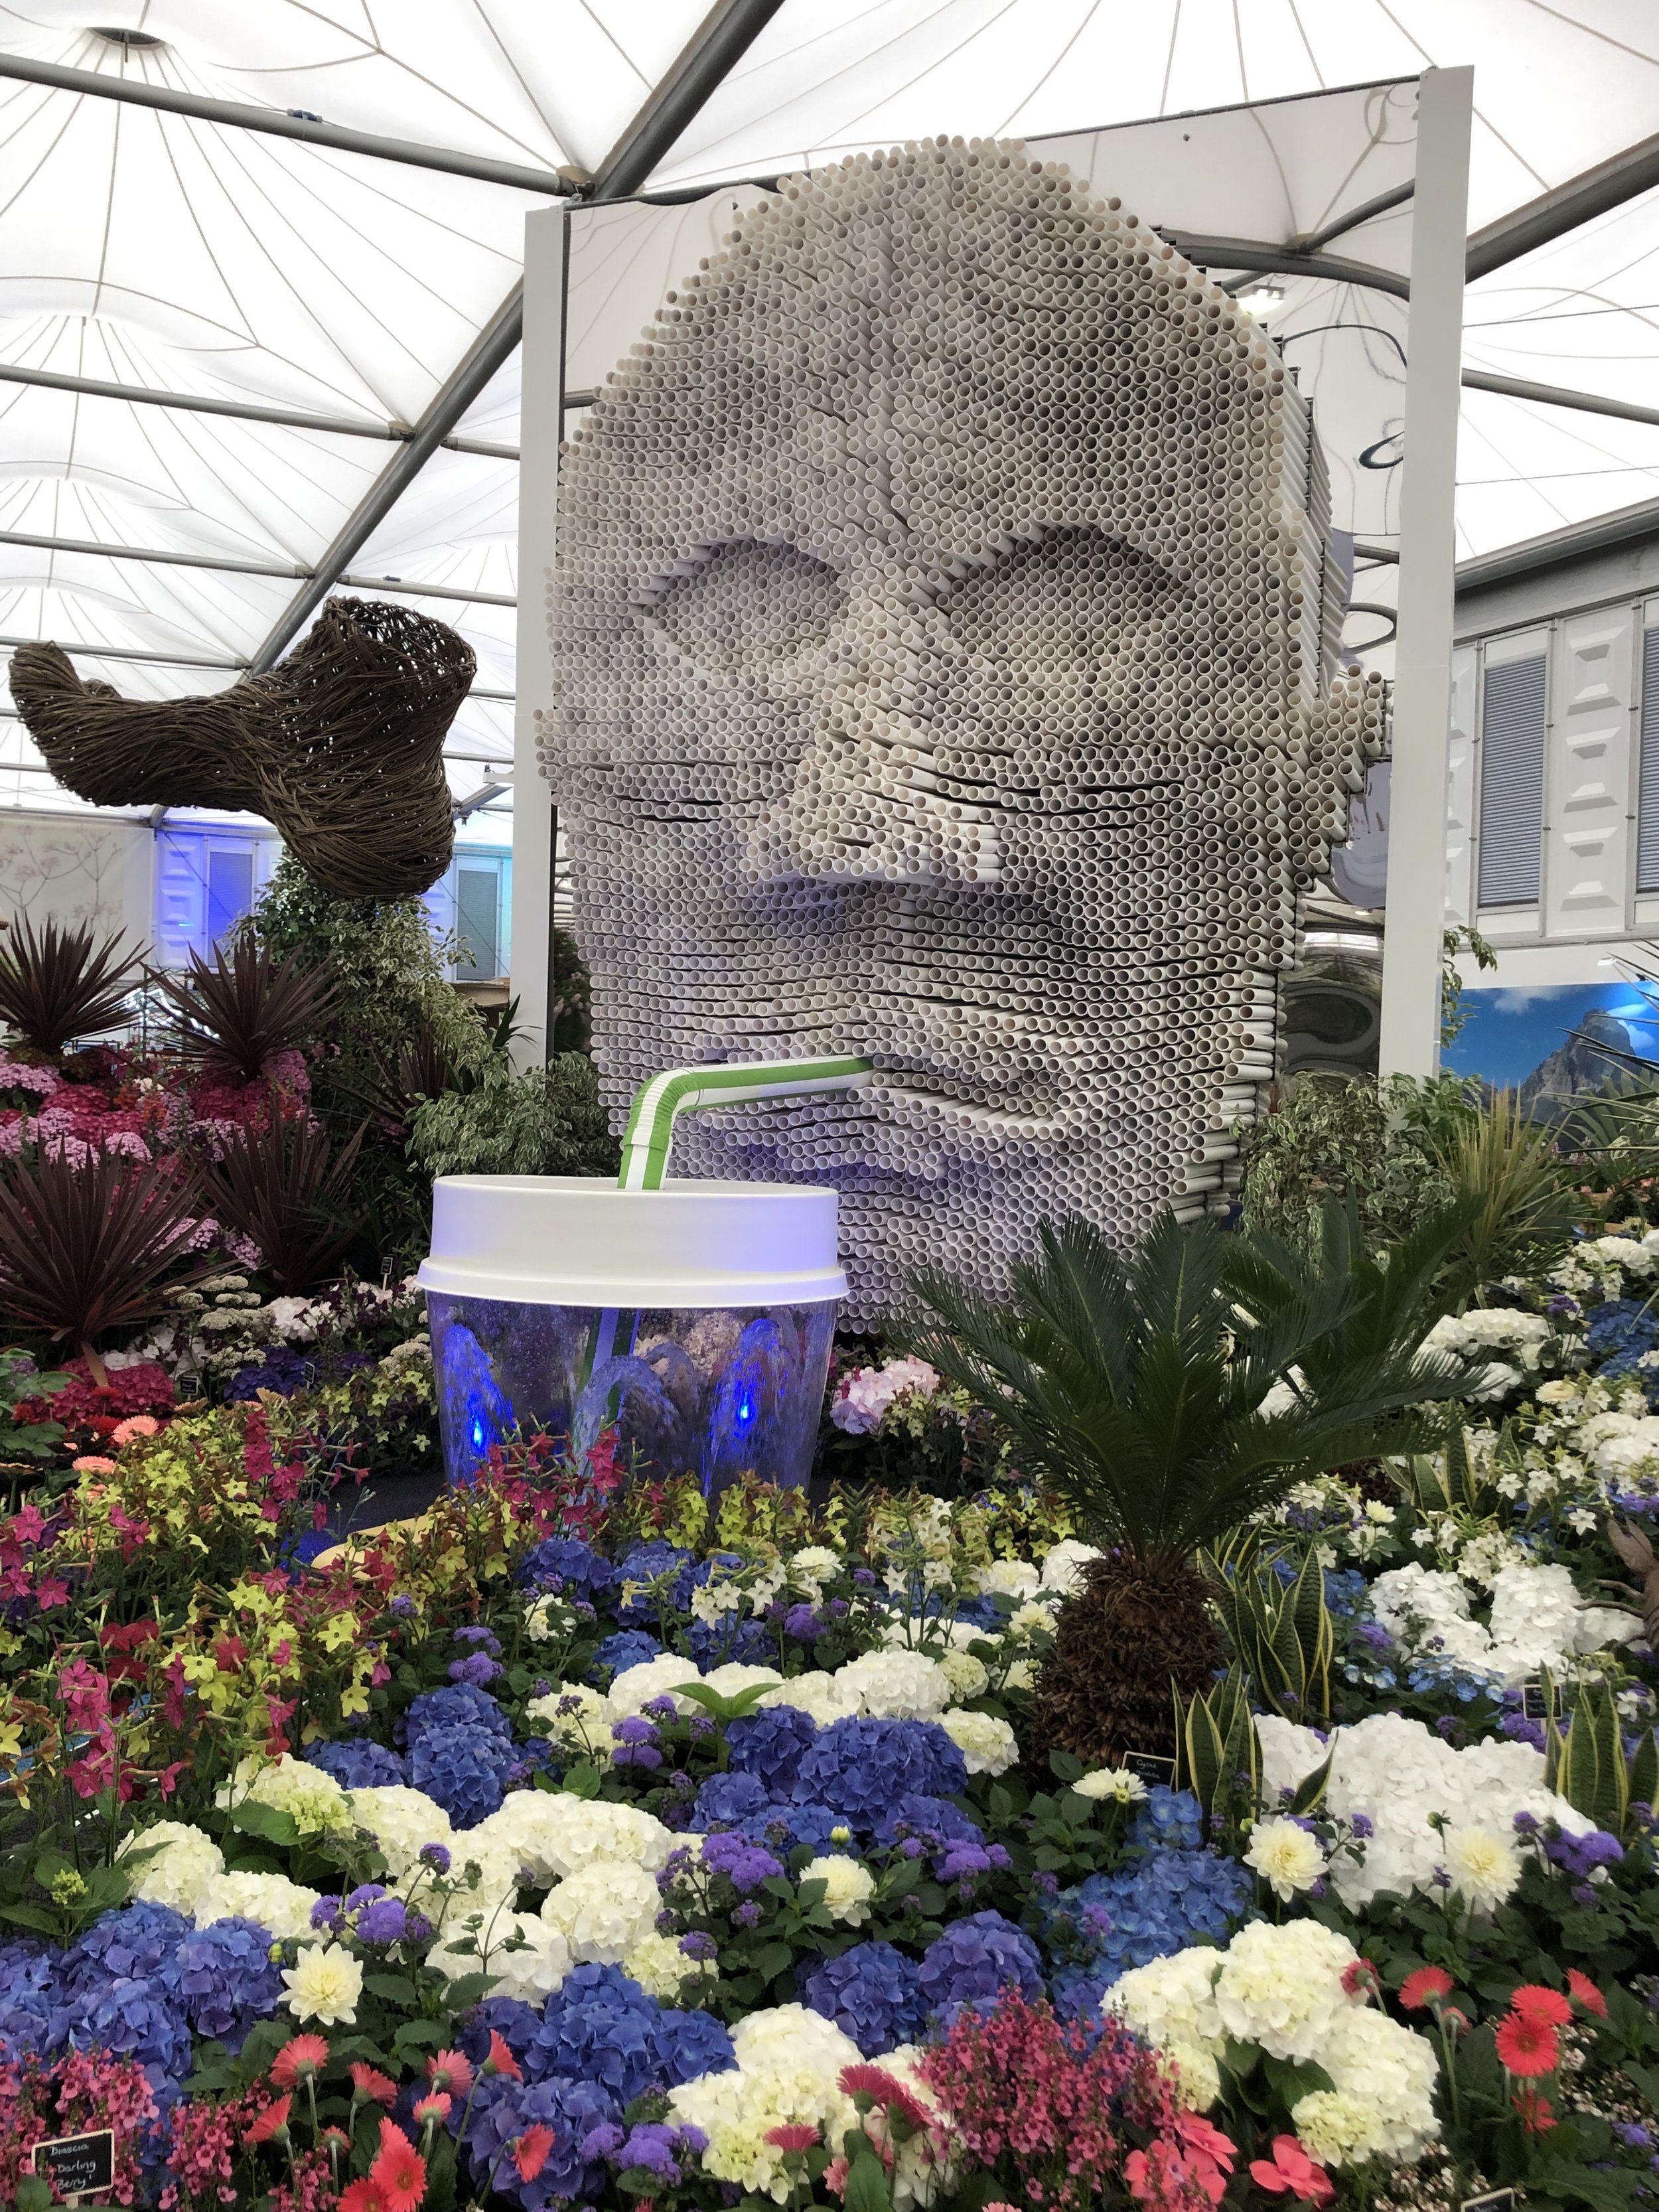 chelsea flower show 2019: how the show will influence home and